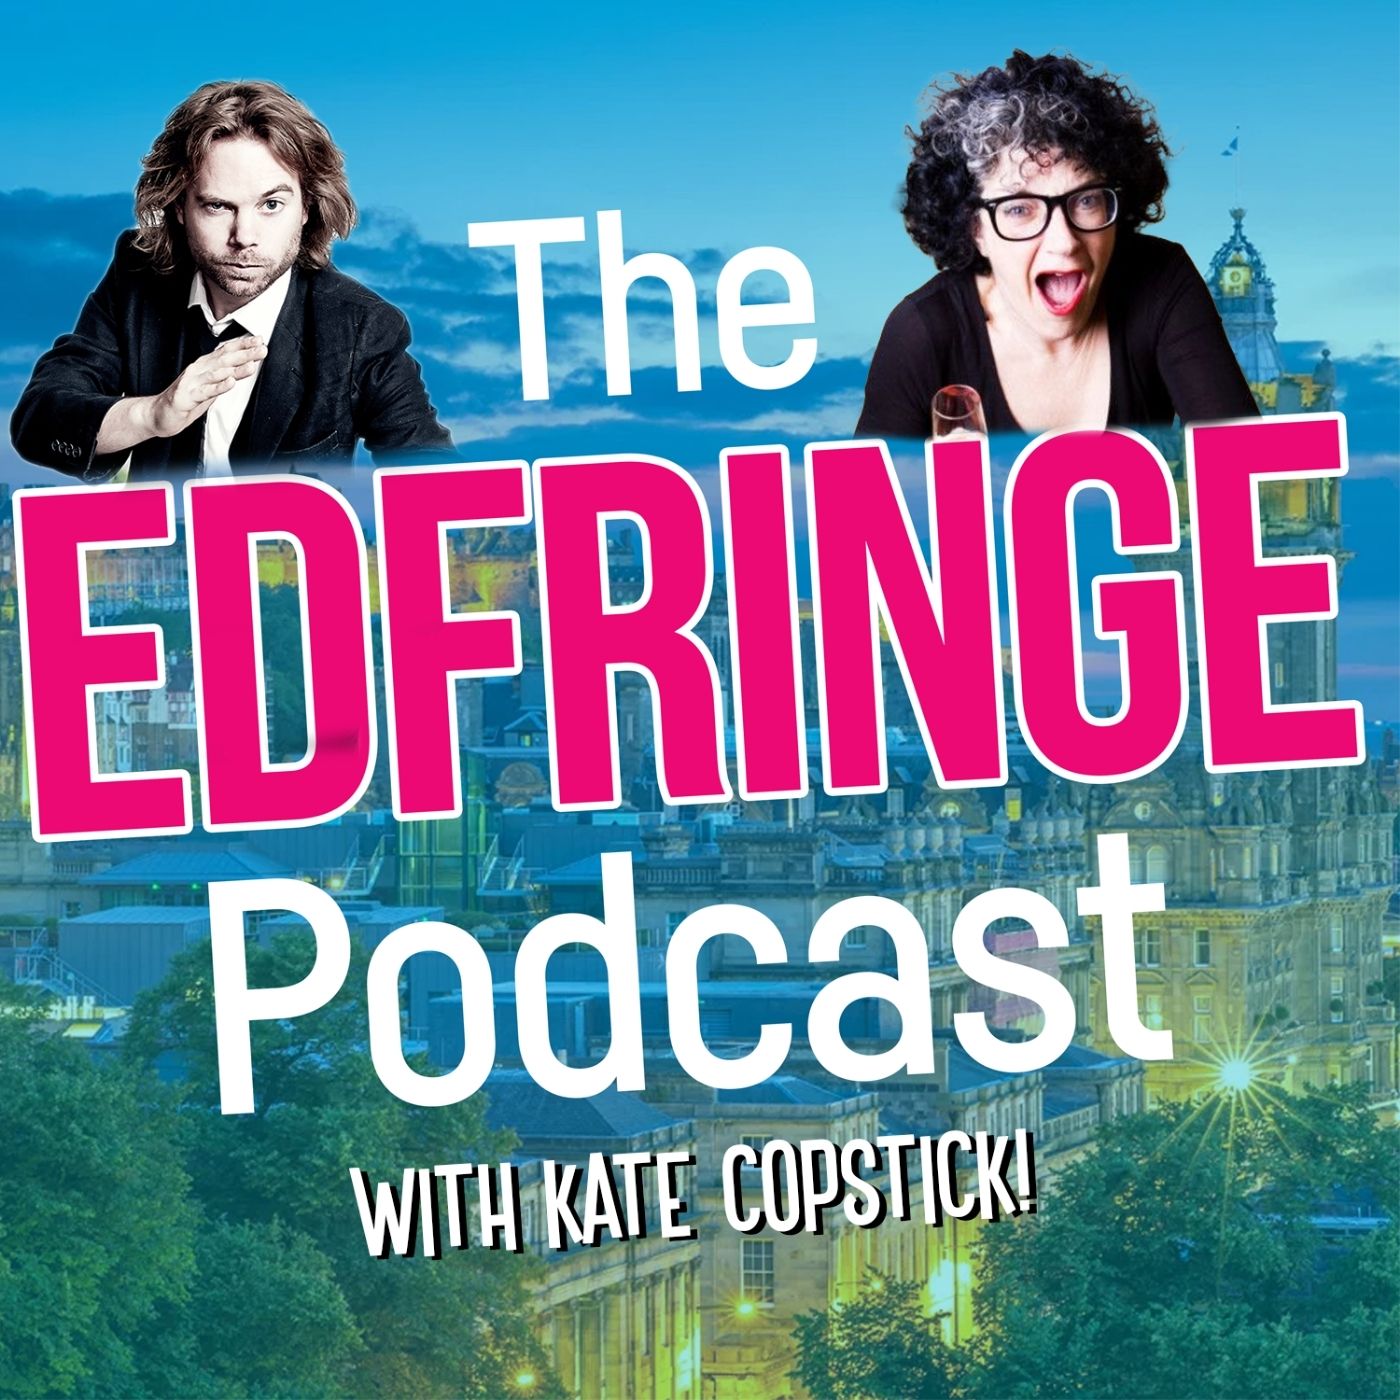 Podcast: The EdFringe Podcast with Kate Copstick - Angel Comedy